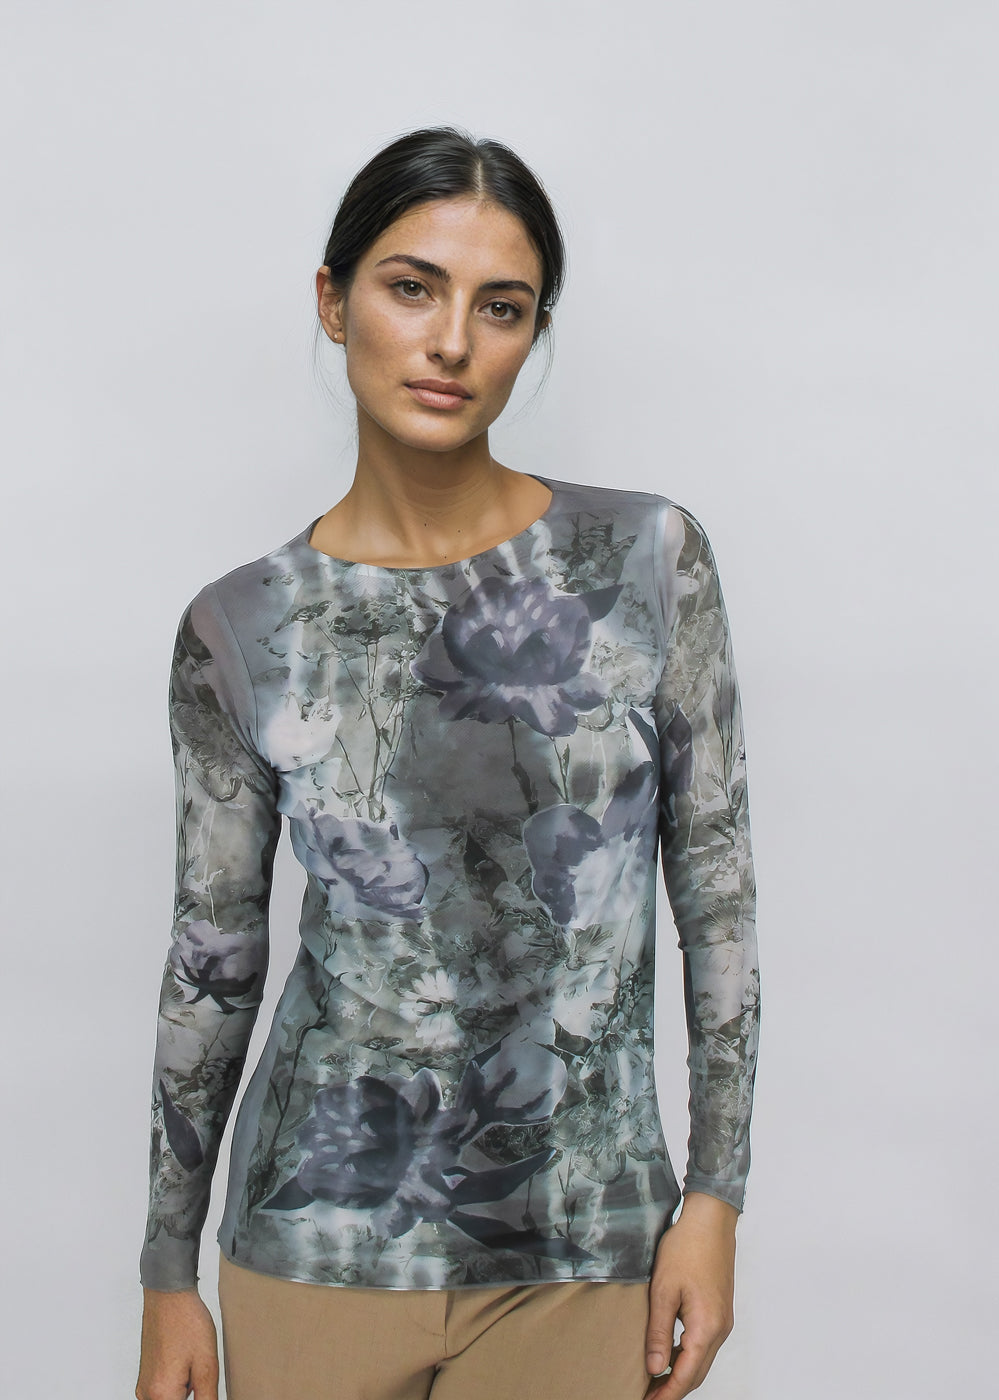 Web Exclusive Florence Double Sheer Top in S/M